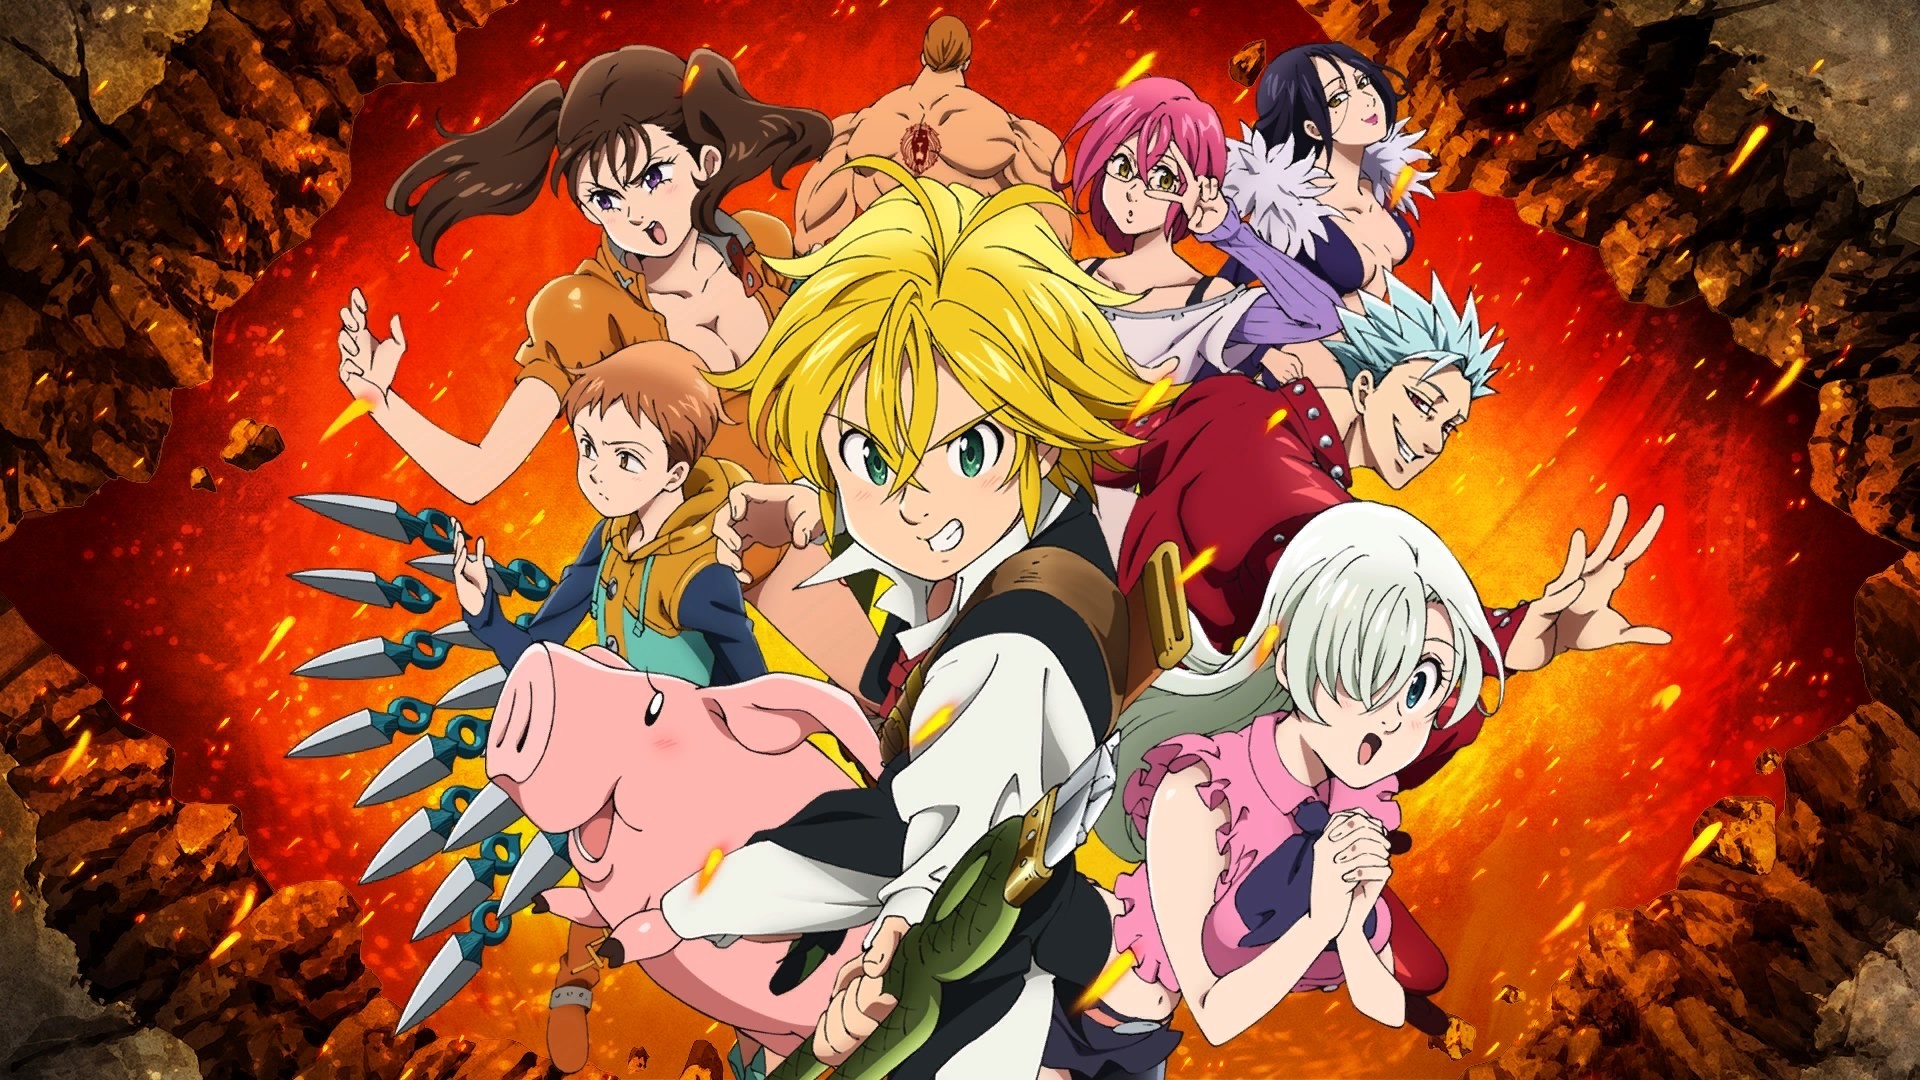 Free download 7 Deadly Sins Wallpaper 75 pictures 1920x1080 for your  Desktop Mobile  Tablet  Explore 47 The Seven Deadly Sins Wallpapers  7  Deadly Sins Wallpaper The Seven Deadly Sins Wallpaper 7 Deadly Sins Anime  Wallpaper